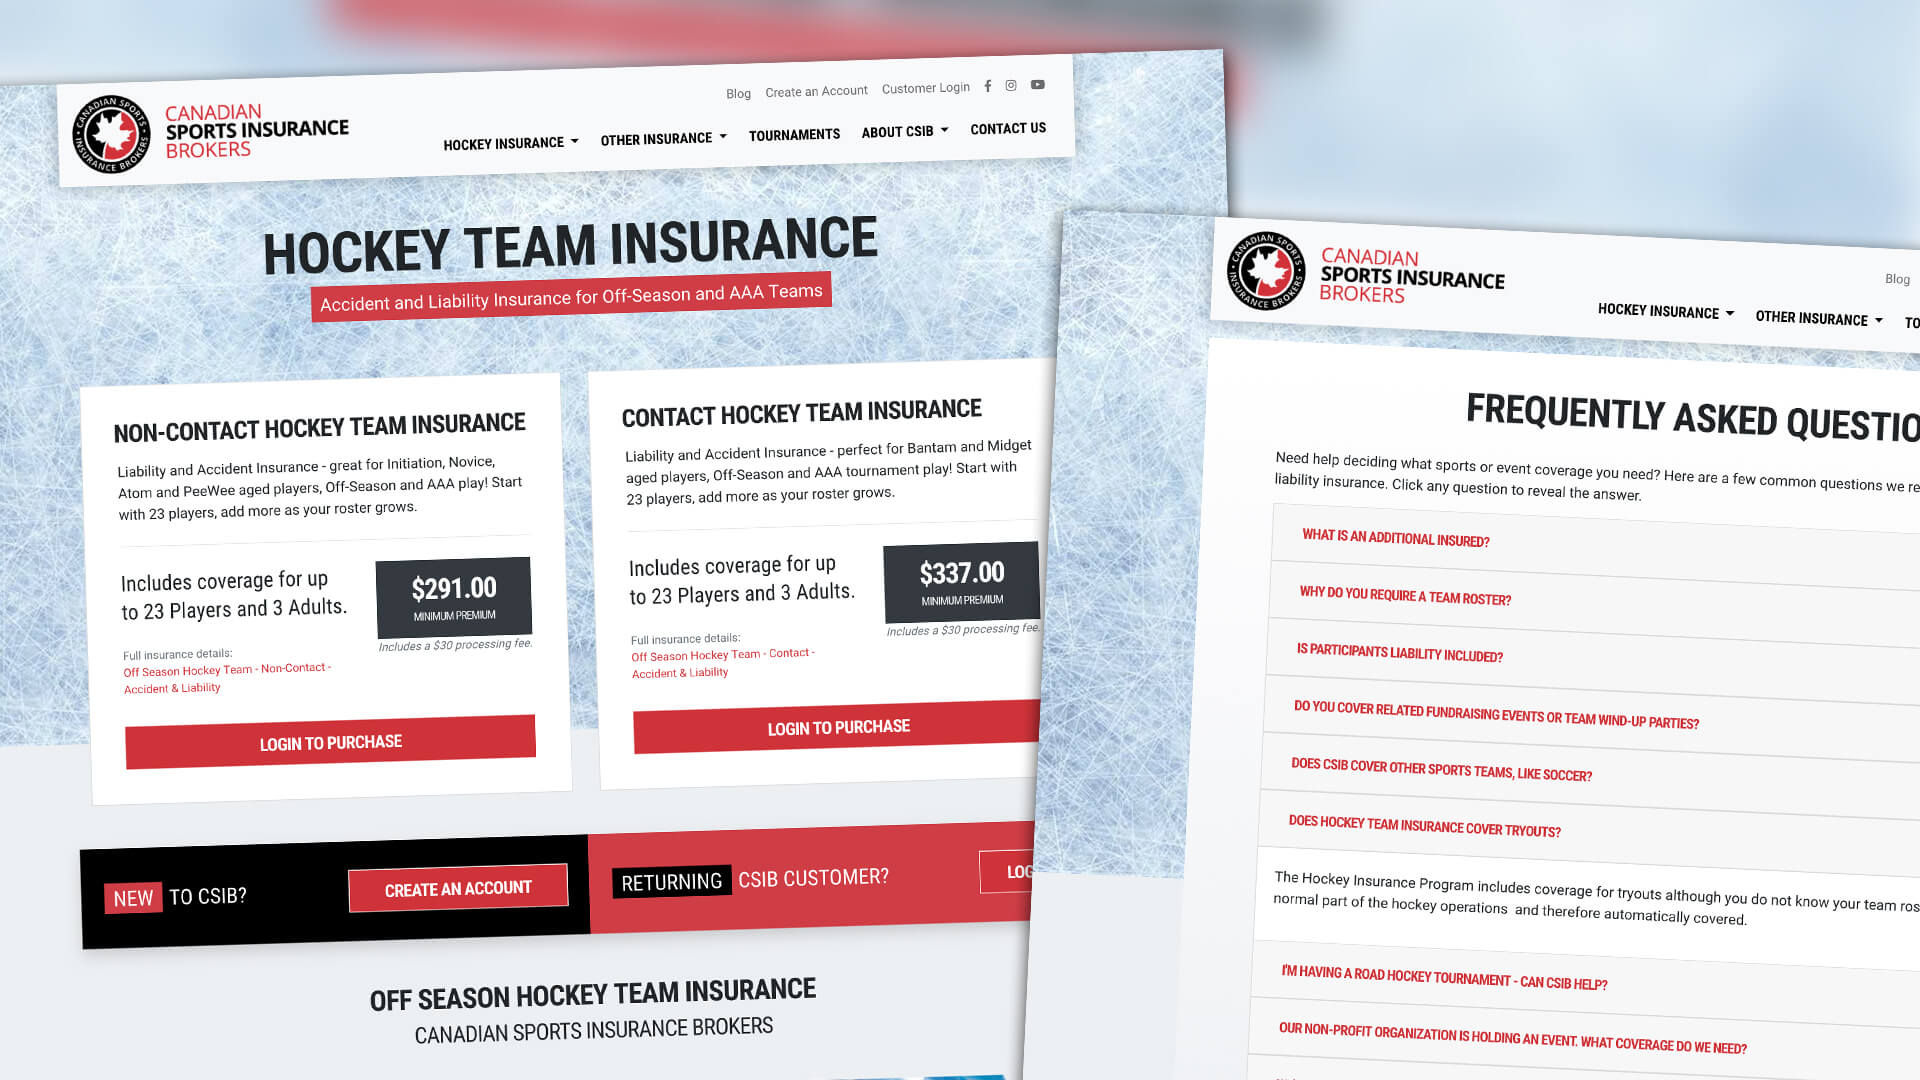 Canadian Sports Insurance Brokers, eCommerce, Canadian Sports Insurance Brokers Website, Portfolio Image, 